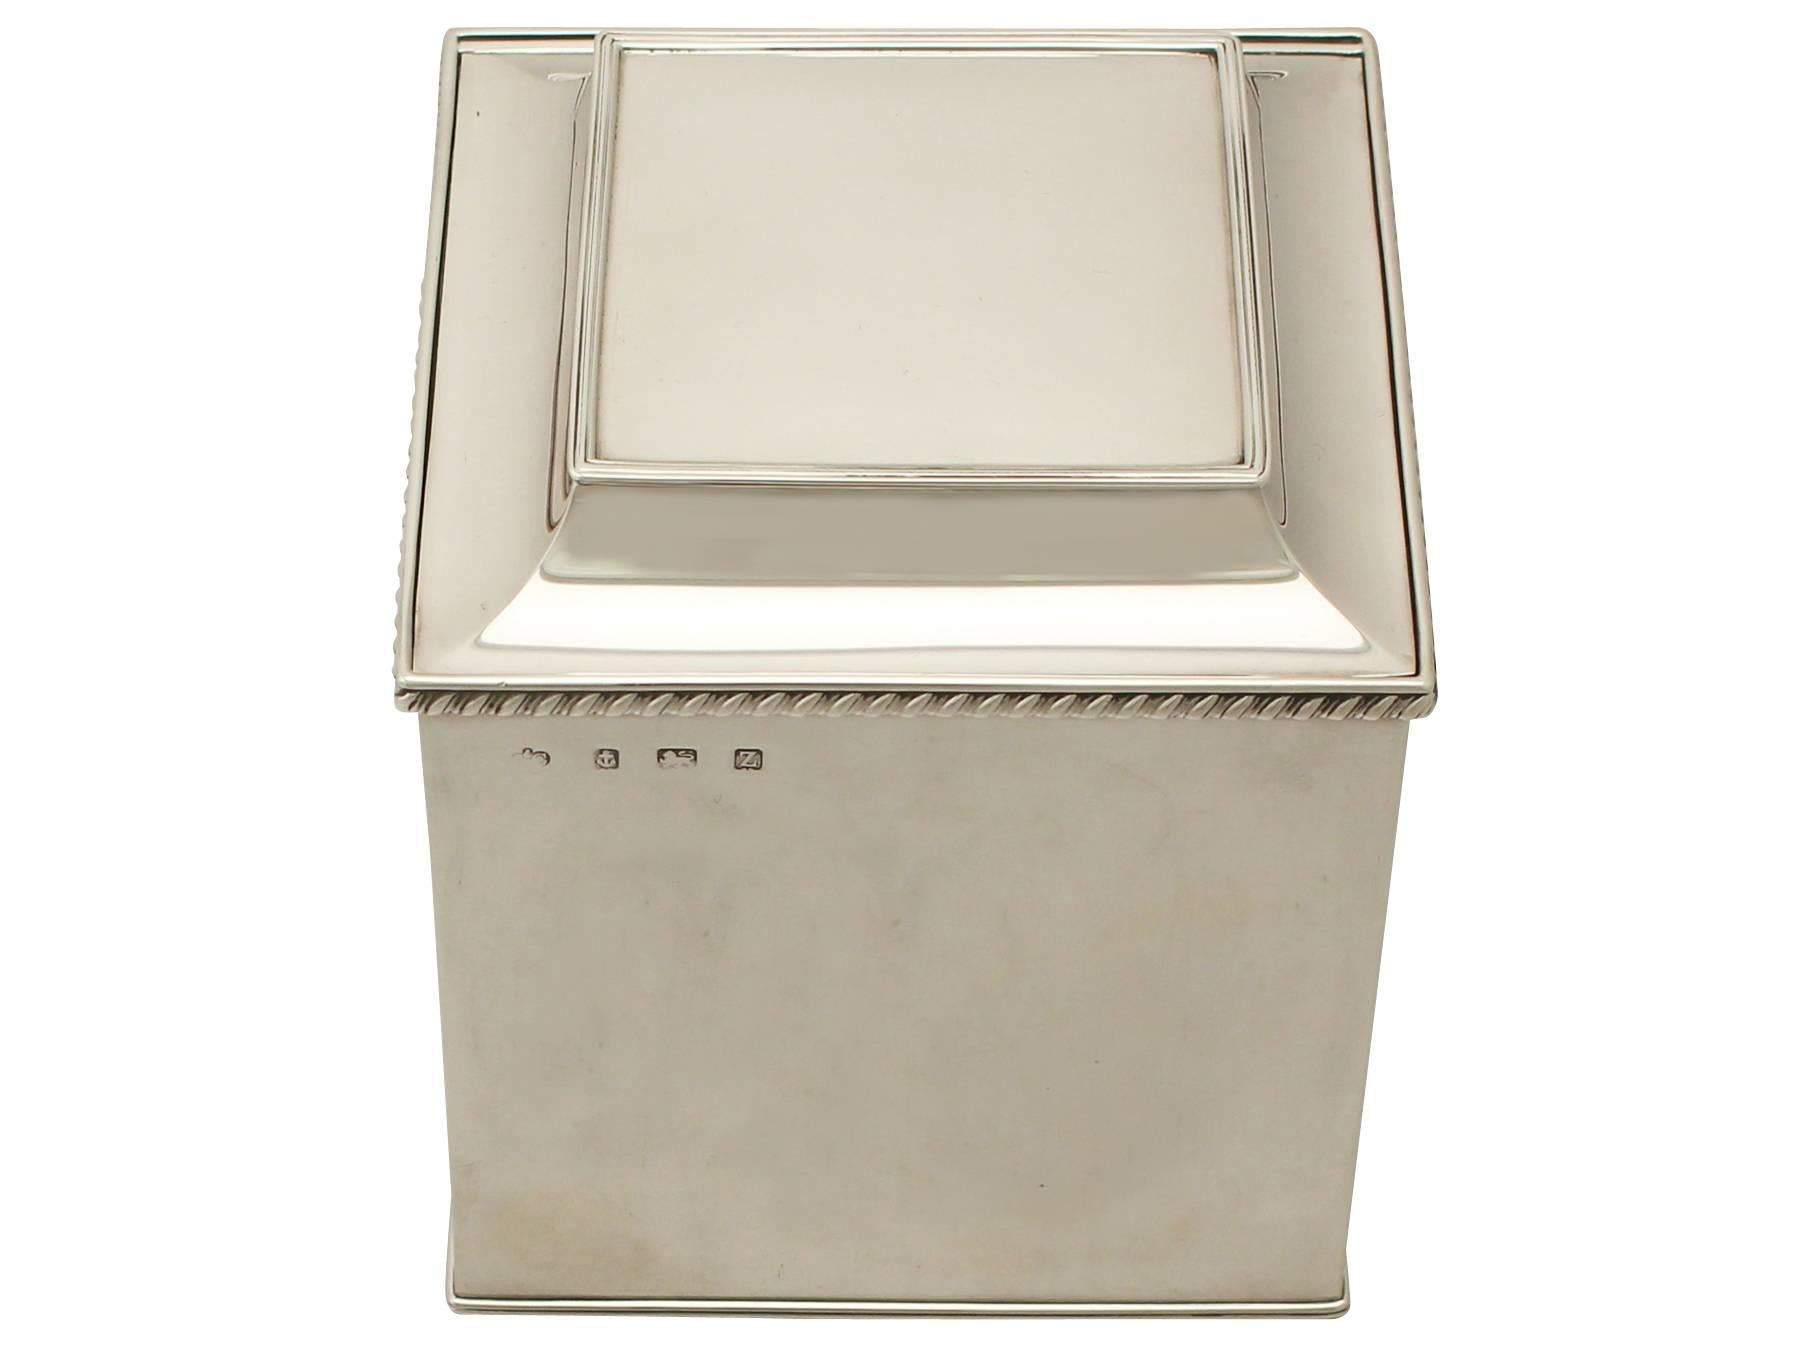 An exceptional, fine and impressive antique George V English sterling silver biscuit box; an addition to the ornamental silverware collection.

This exceptional antique sterling silver biscuit box has a plain cuboid form.

The surface of this